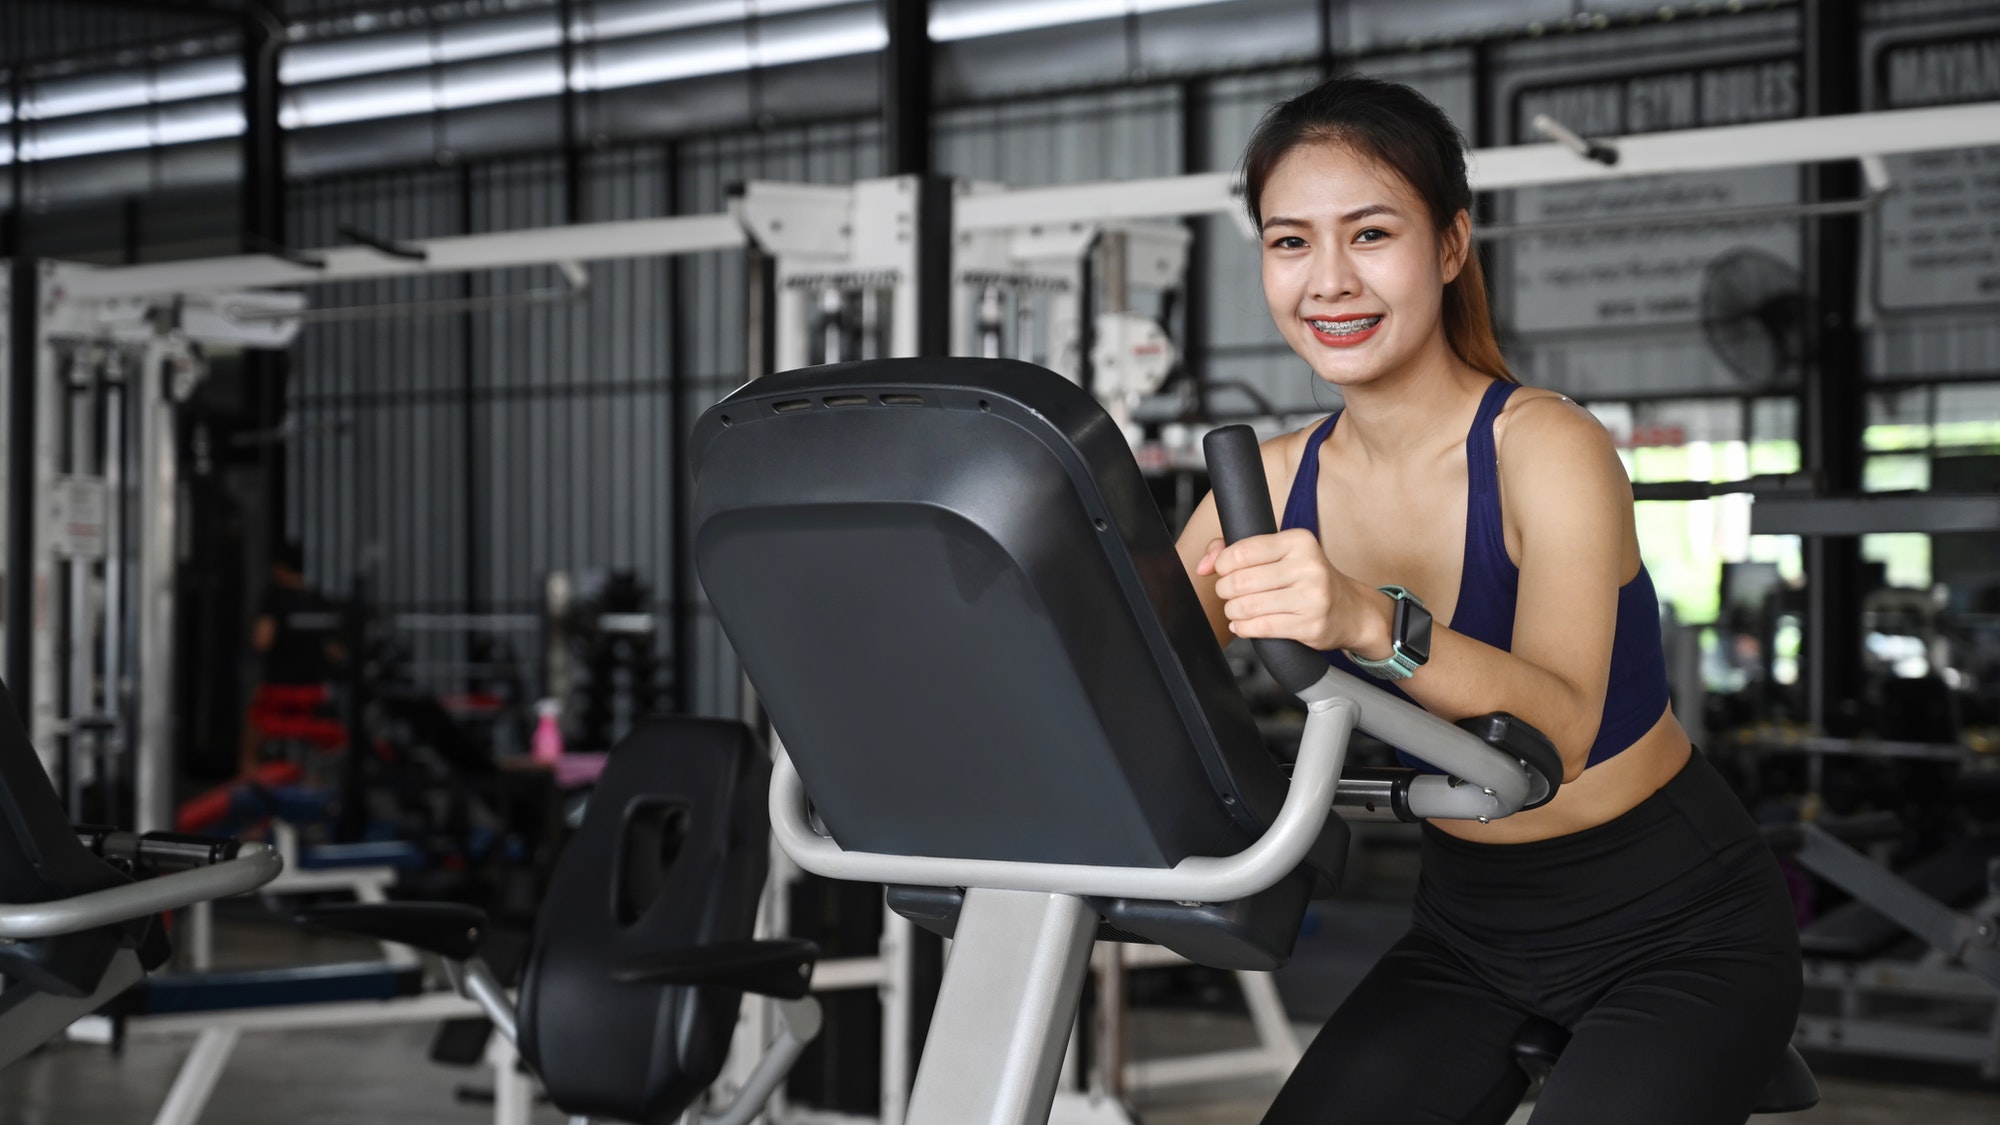 smiling fit young woman cycling machines in sports club .jpg